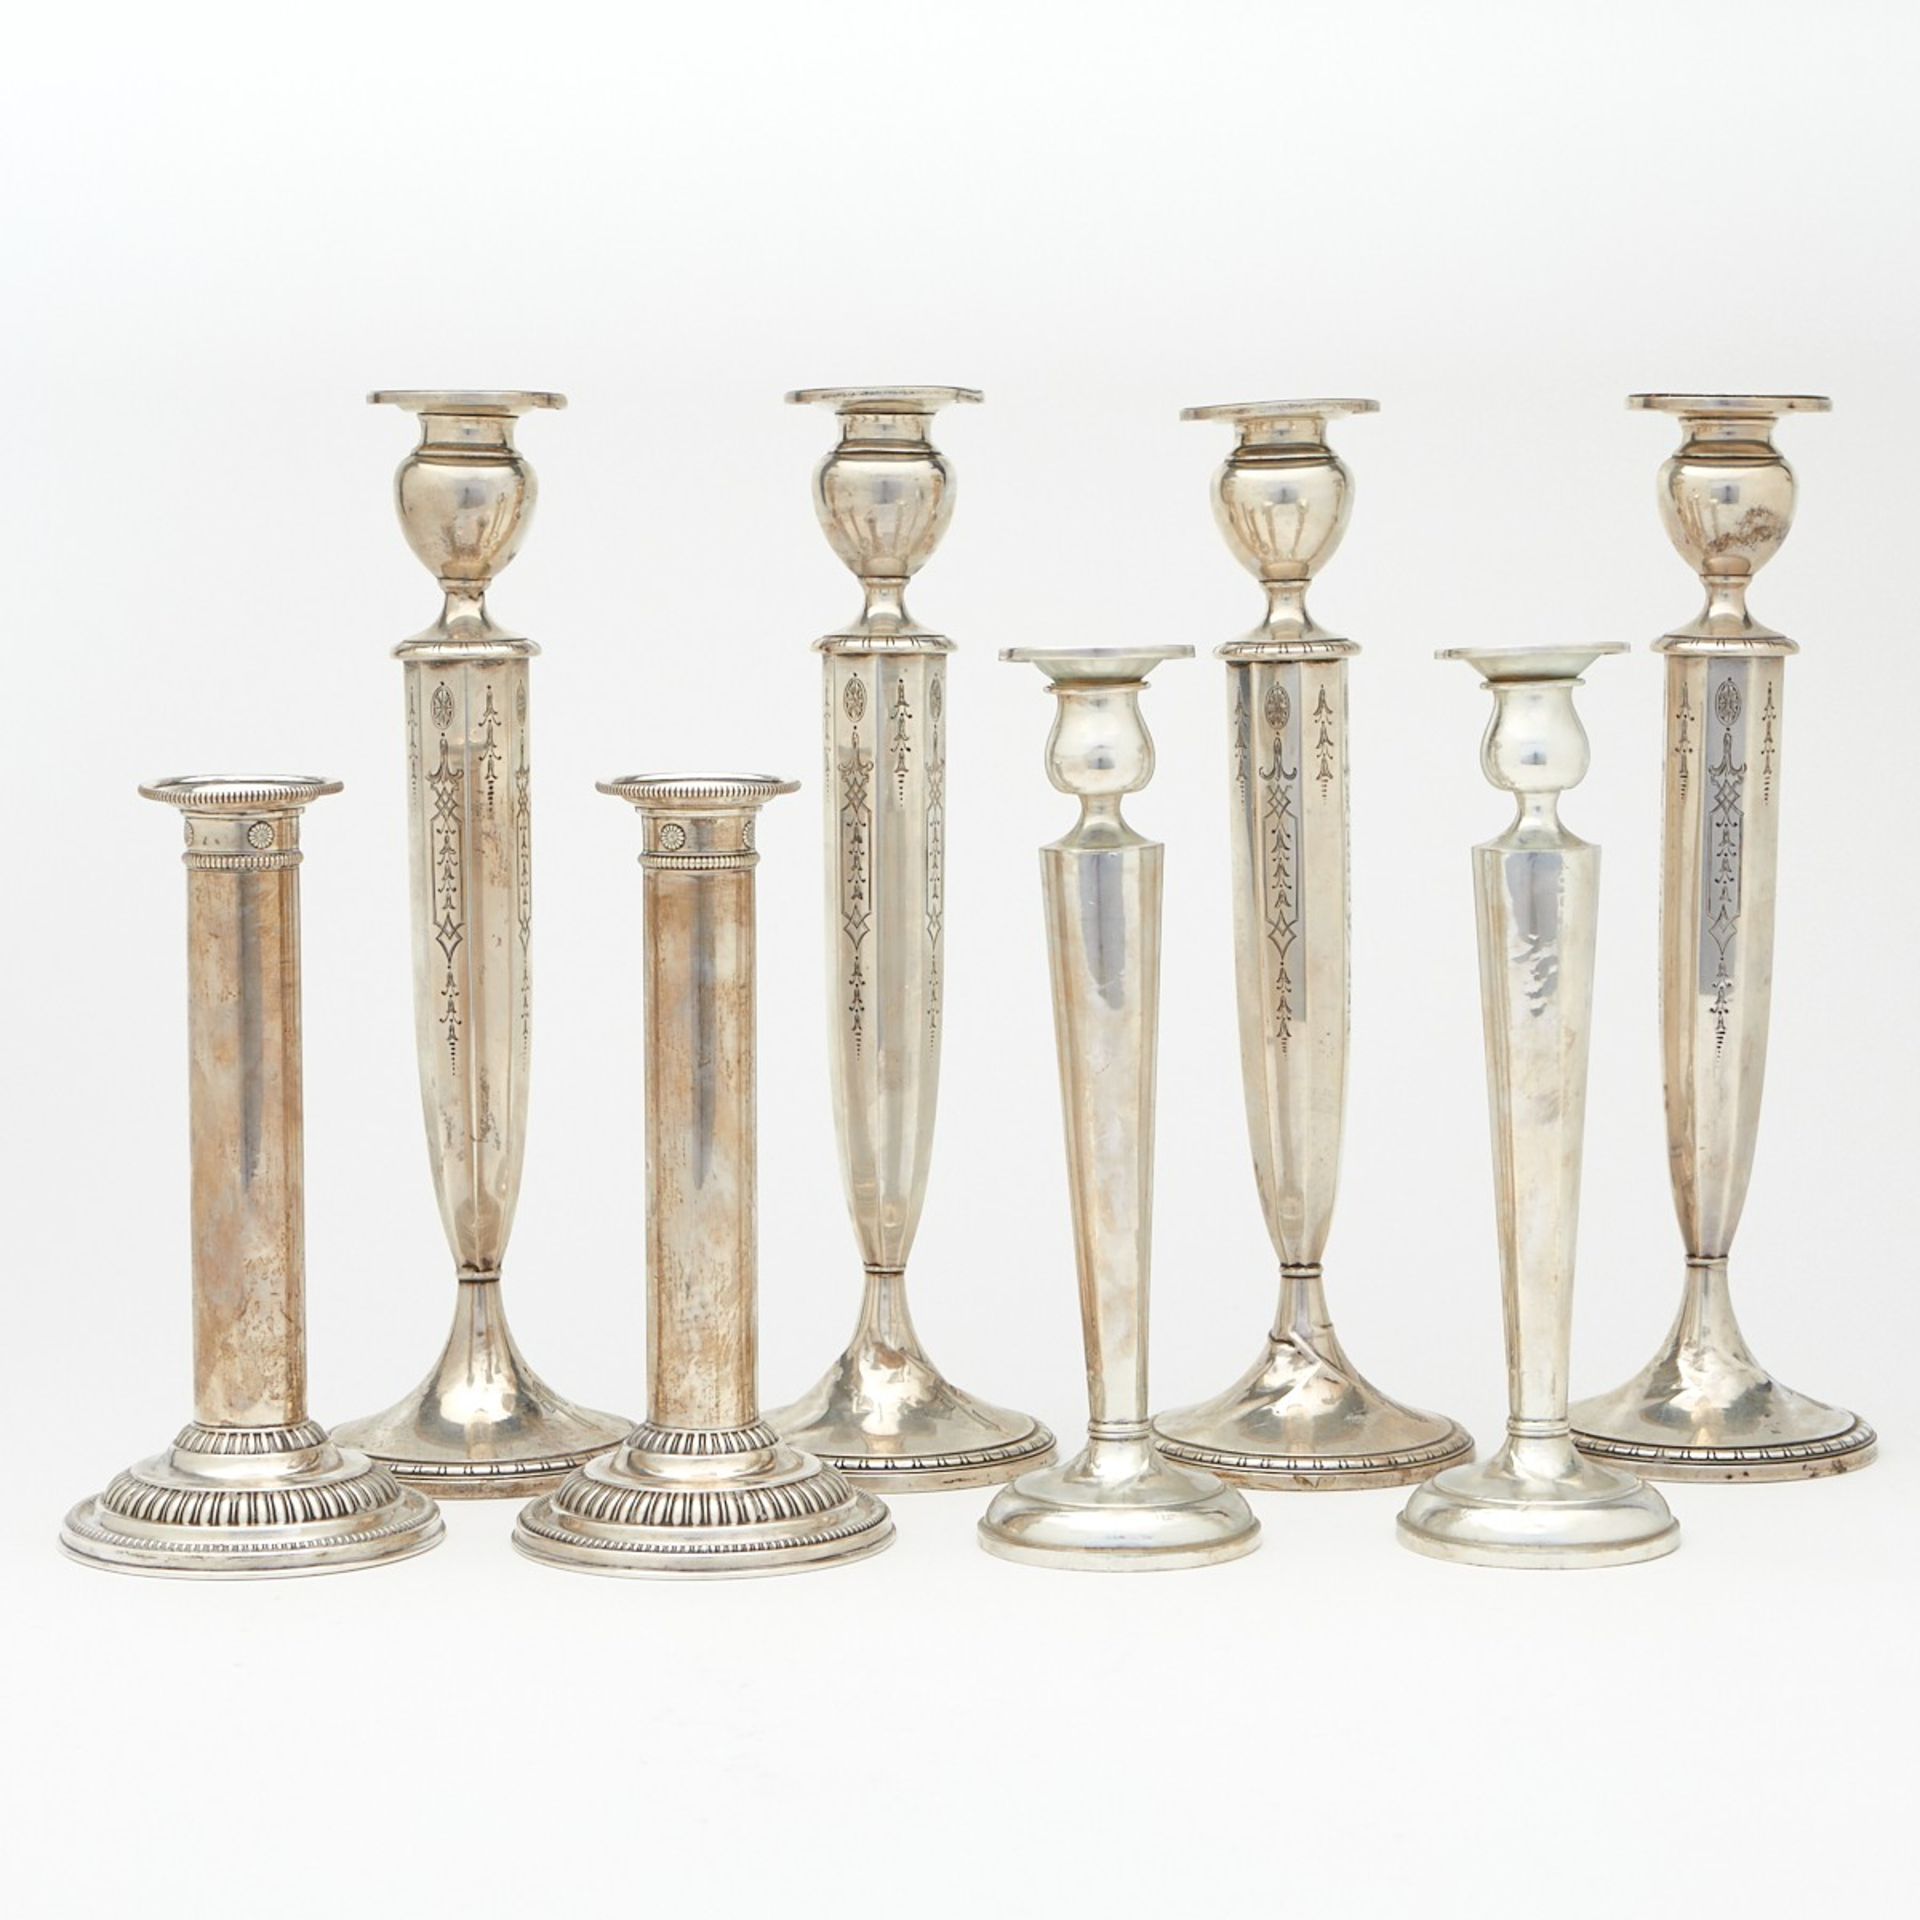 Grp: 8 Paired Sterling Silver Candlesticks - Image 3 of 7